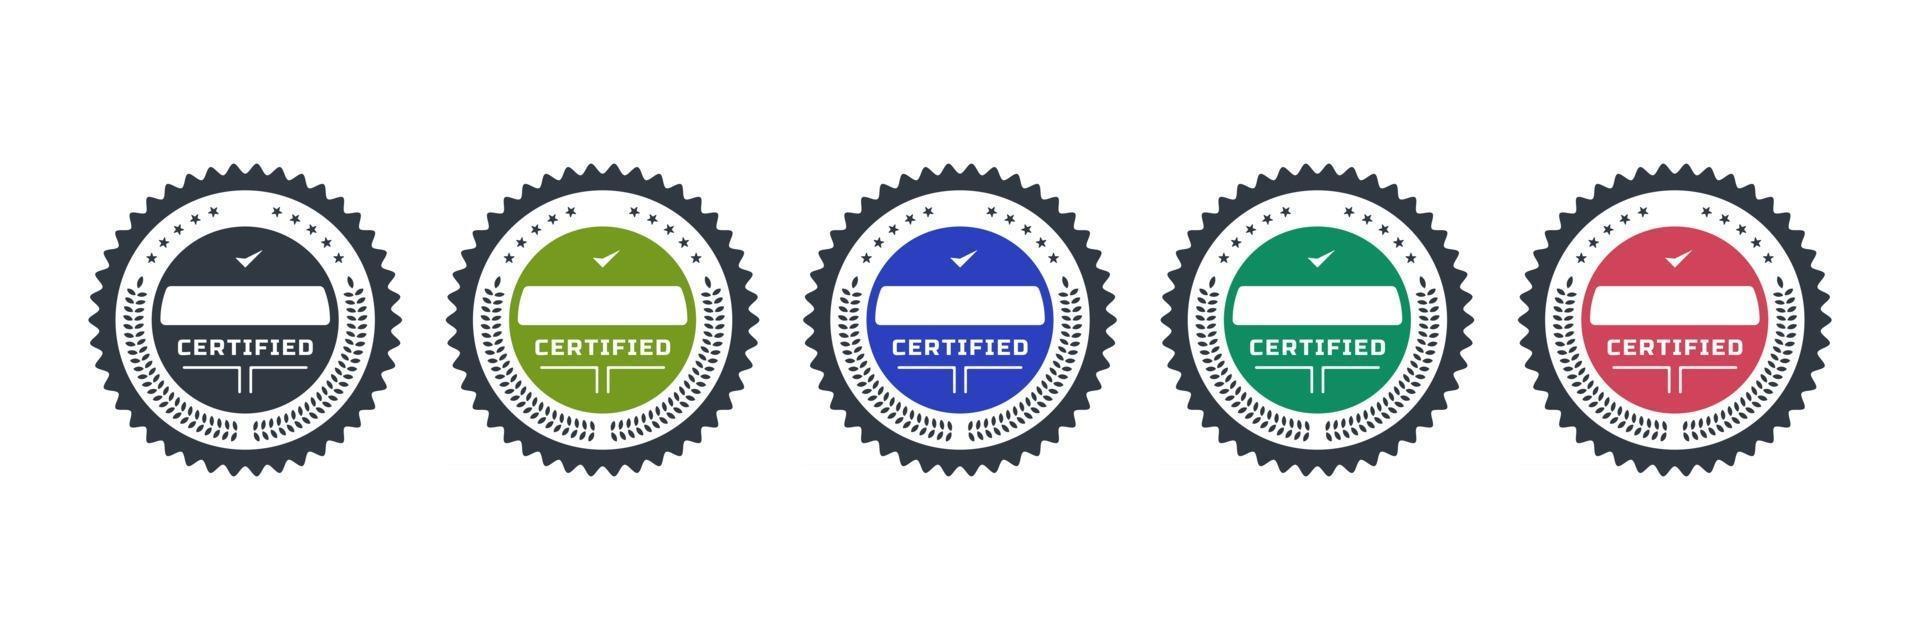 Certified badge logos for certification company Vector emblem icon template